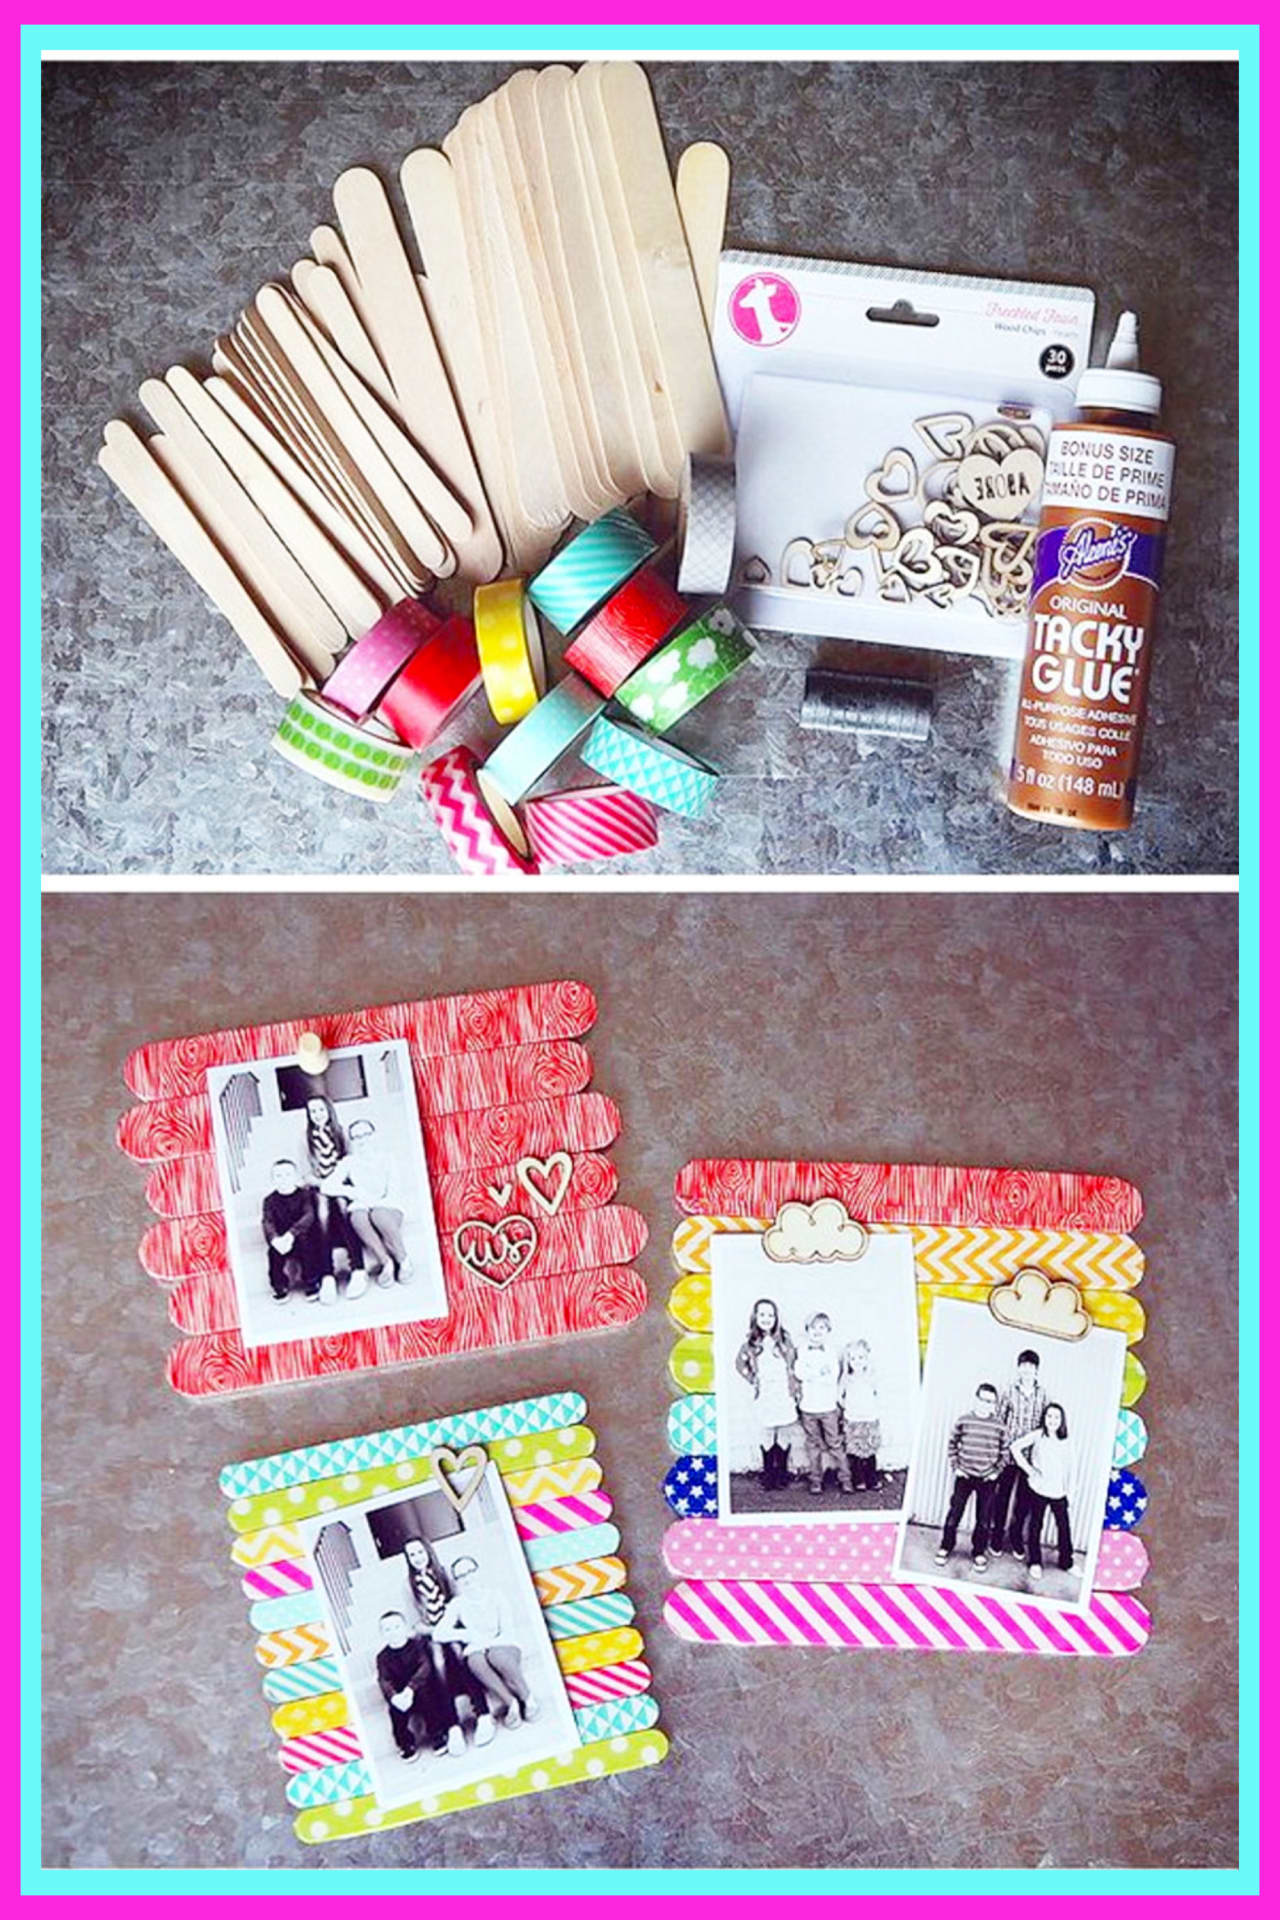 Easy gifts for dad kids can make - fathers day gifts from kids and Father's Day crafts for kids